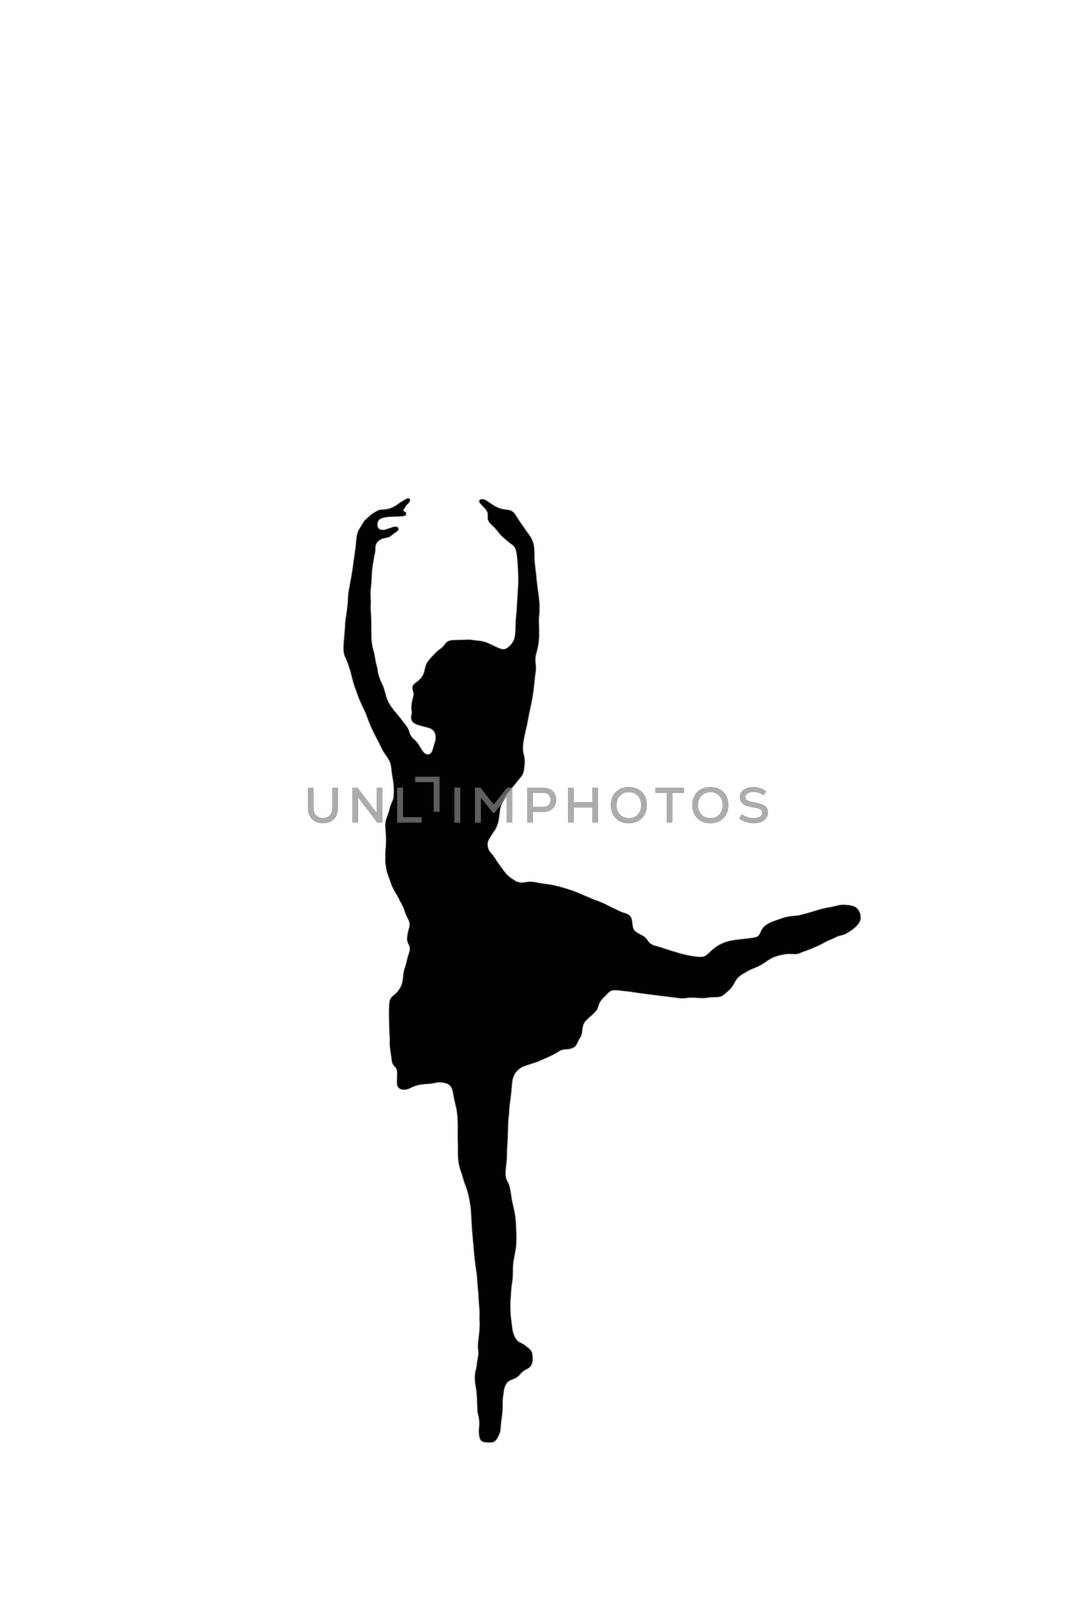 elegant ballerina silhouette of a young ballet dancing girl on pointe shoes in attitude derriere isolated on a white background by charlottebleijenberg